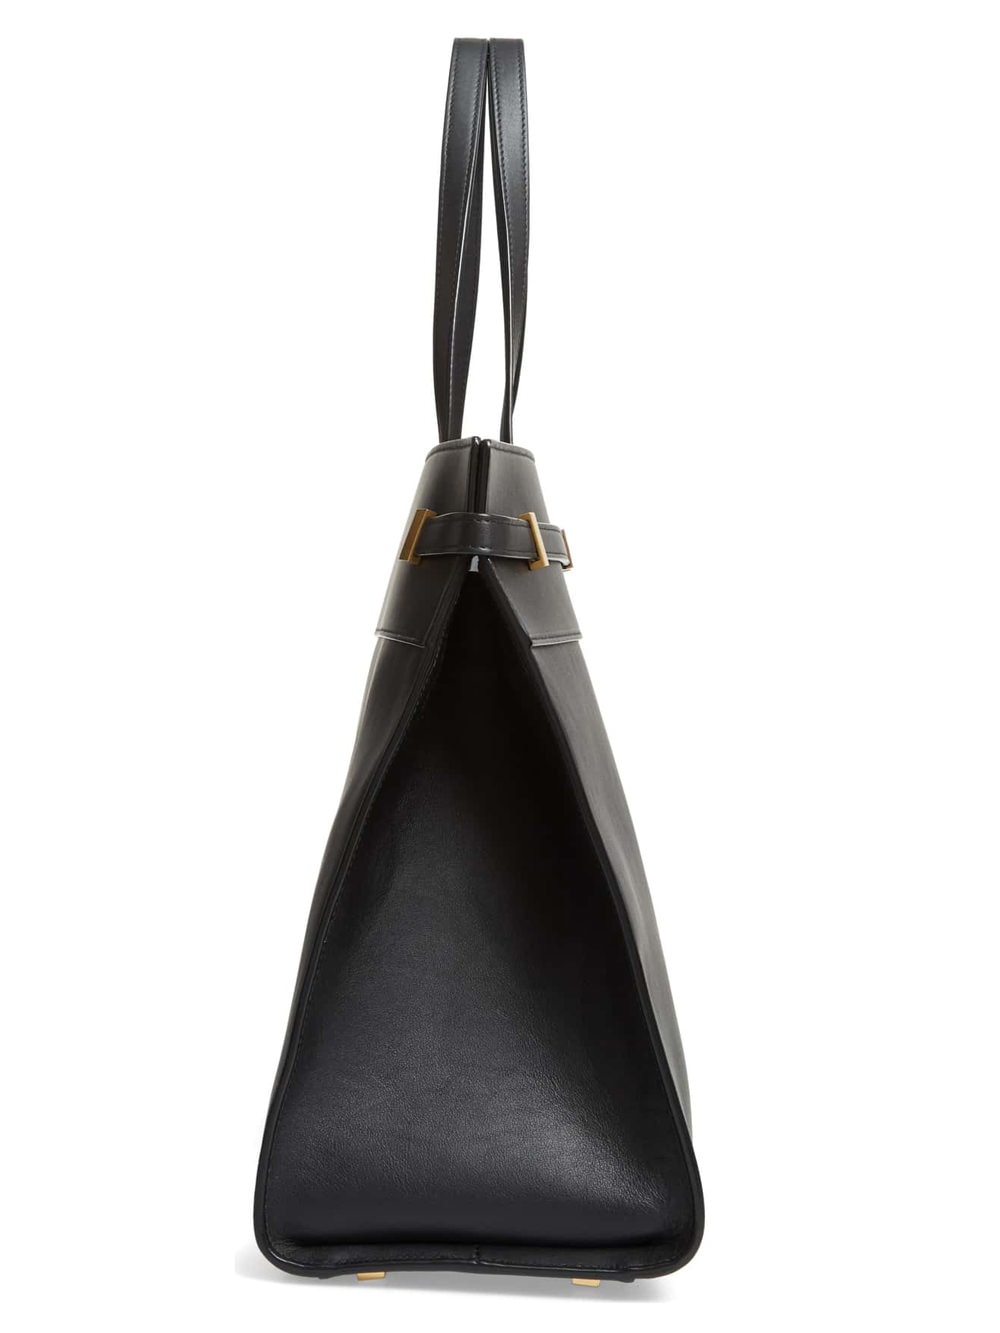 Givenchy & Saint Laurent are This Round's Undisputed Bag Champs - PurseBlog